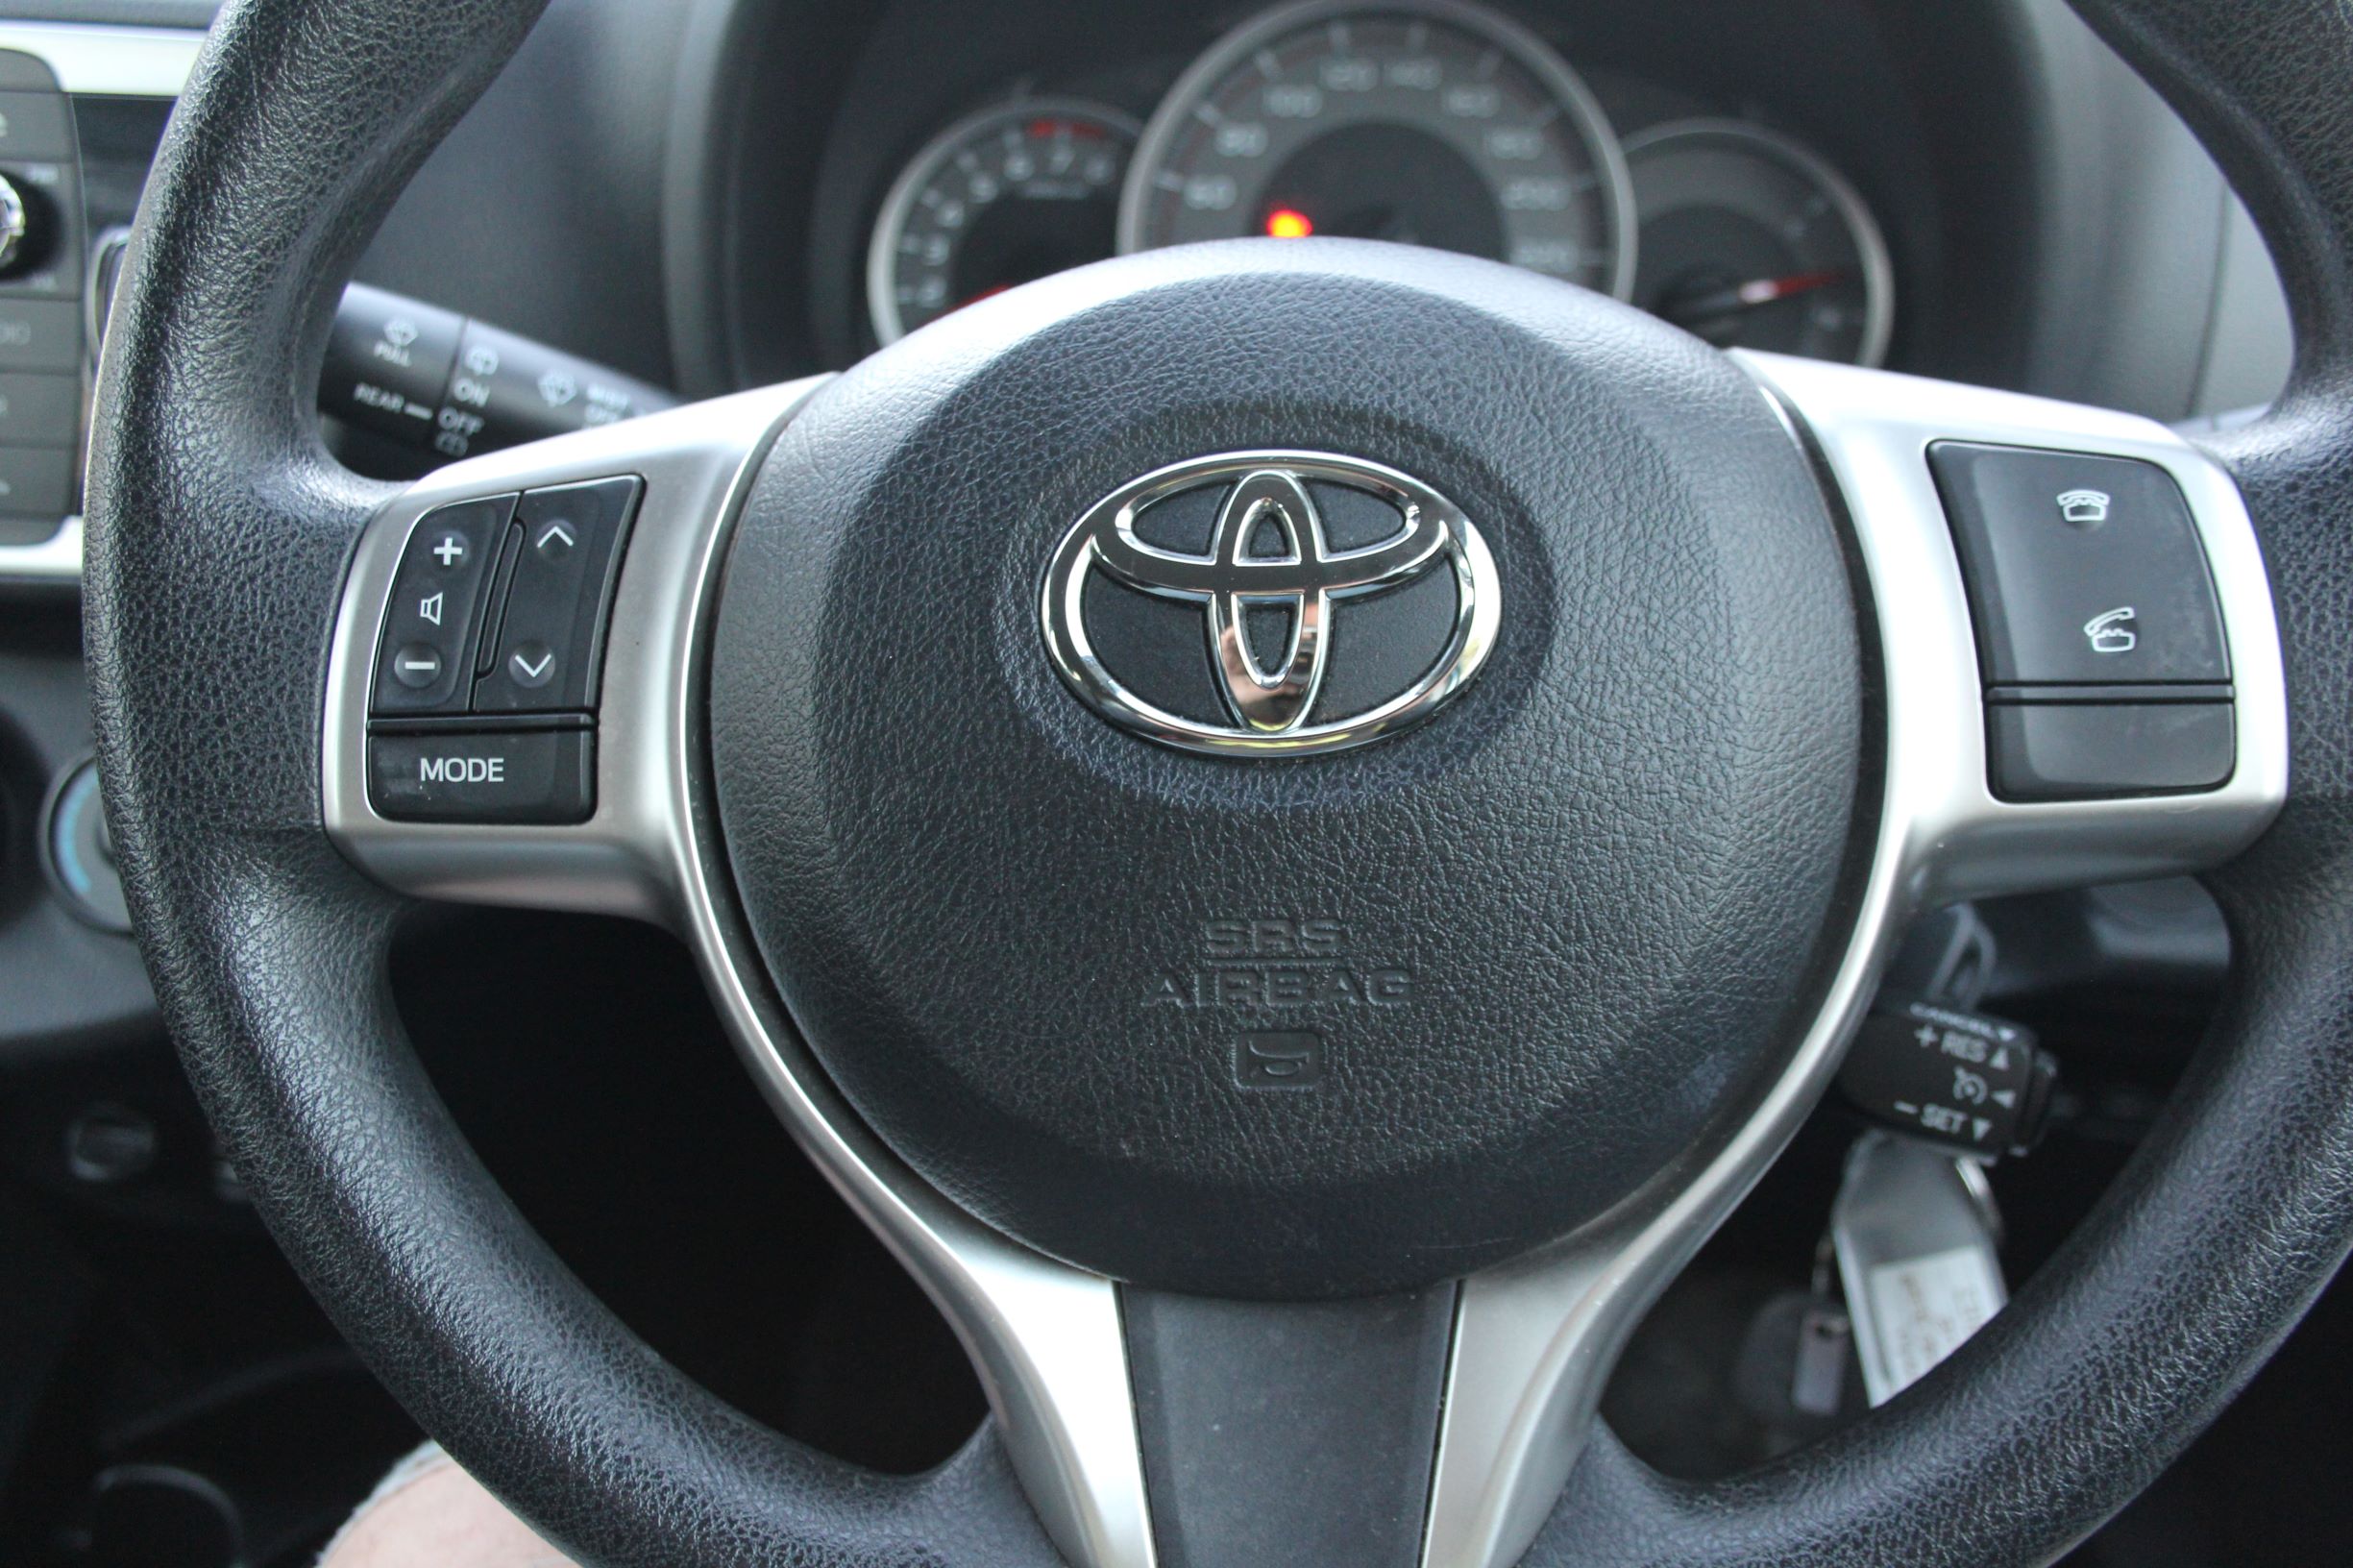 Toyota Yaris GX 2014 for sale in Auckland